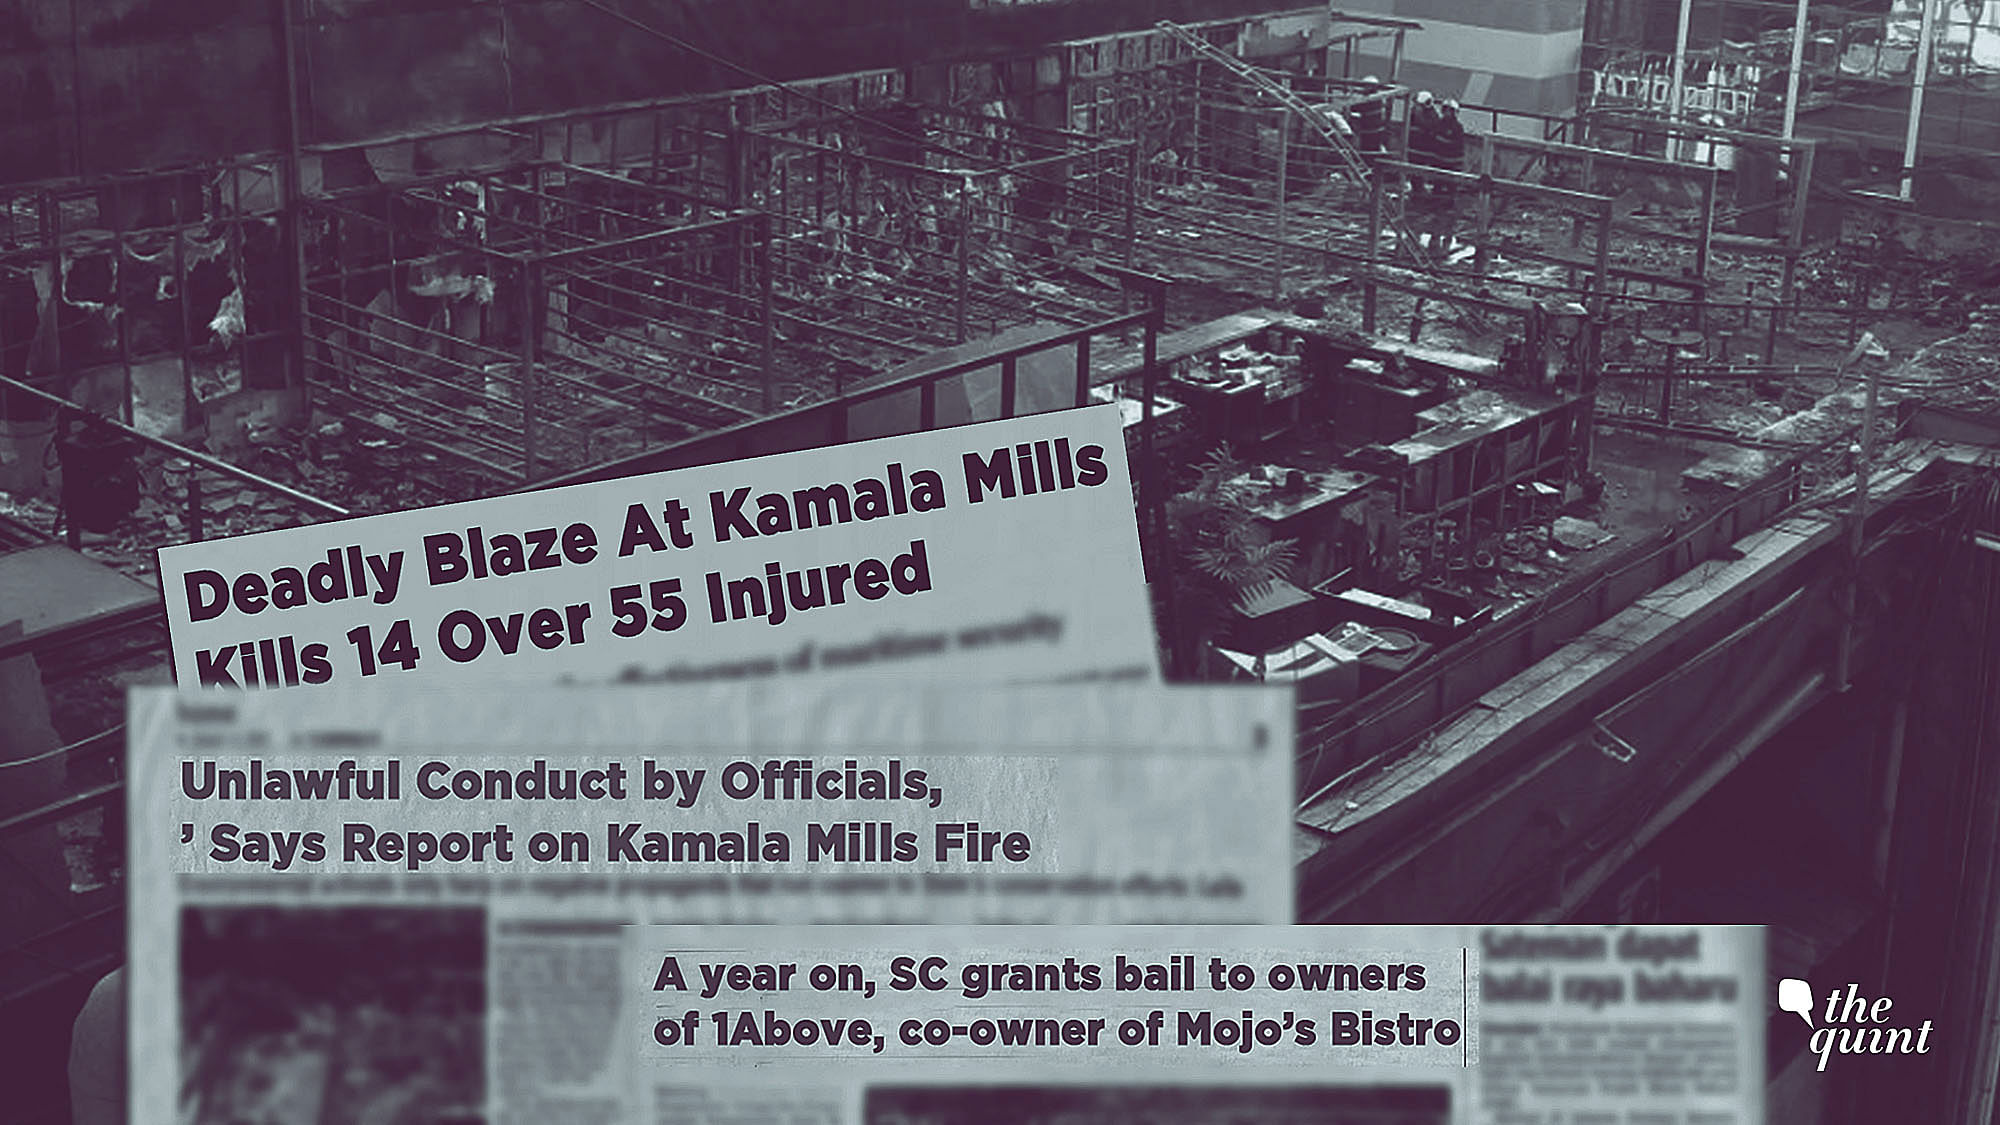 One year since a deadly blaze at Kamala Mills killed 14 people, survivors still fight for compensation from the Govt.